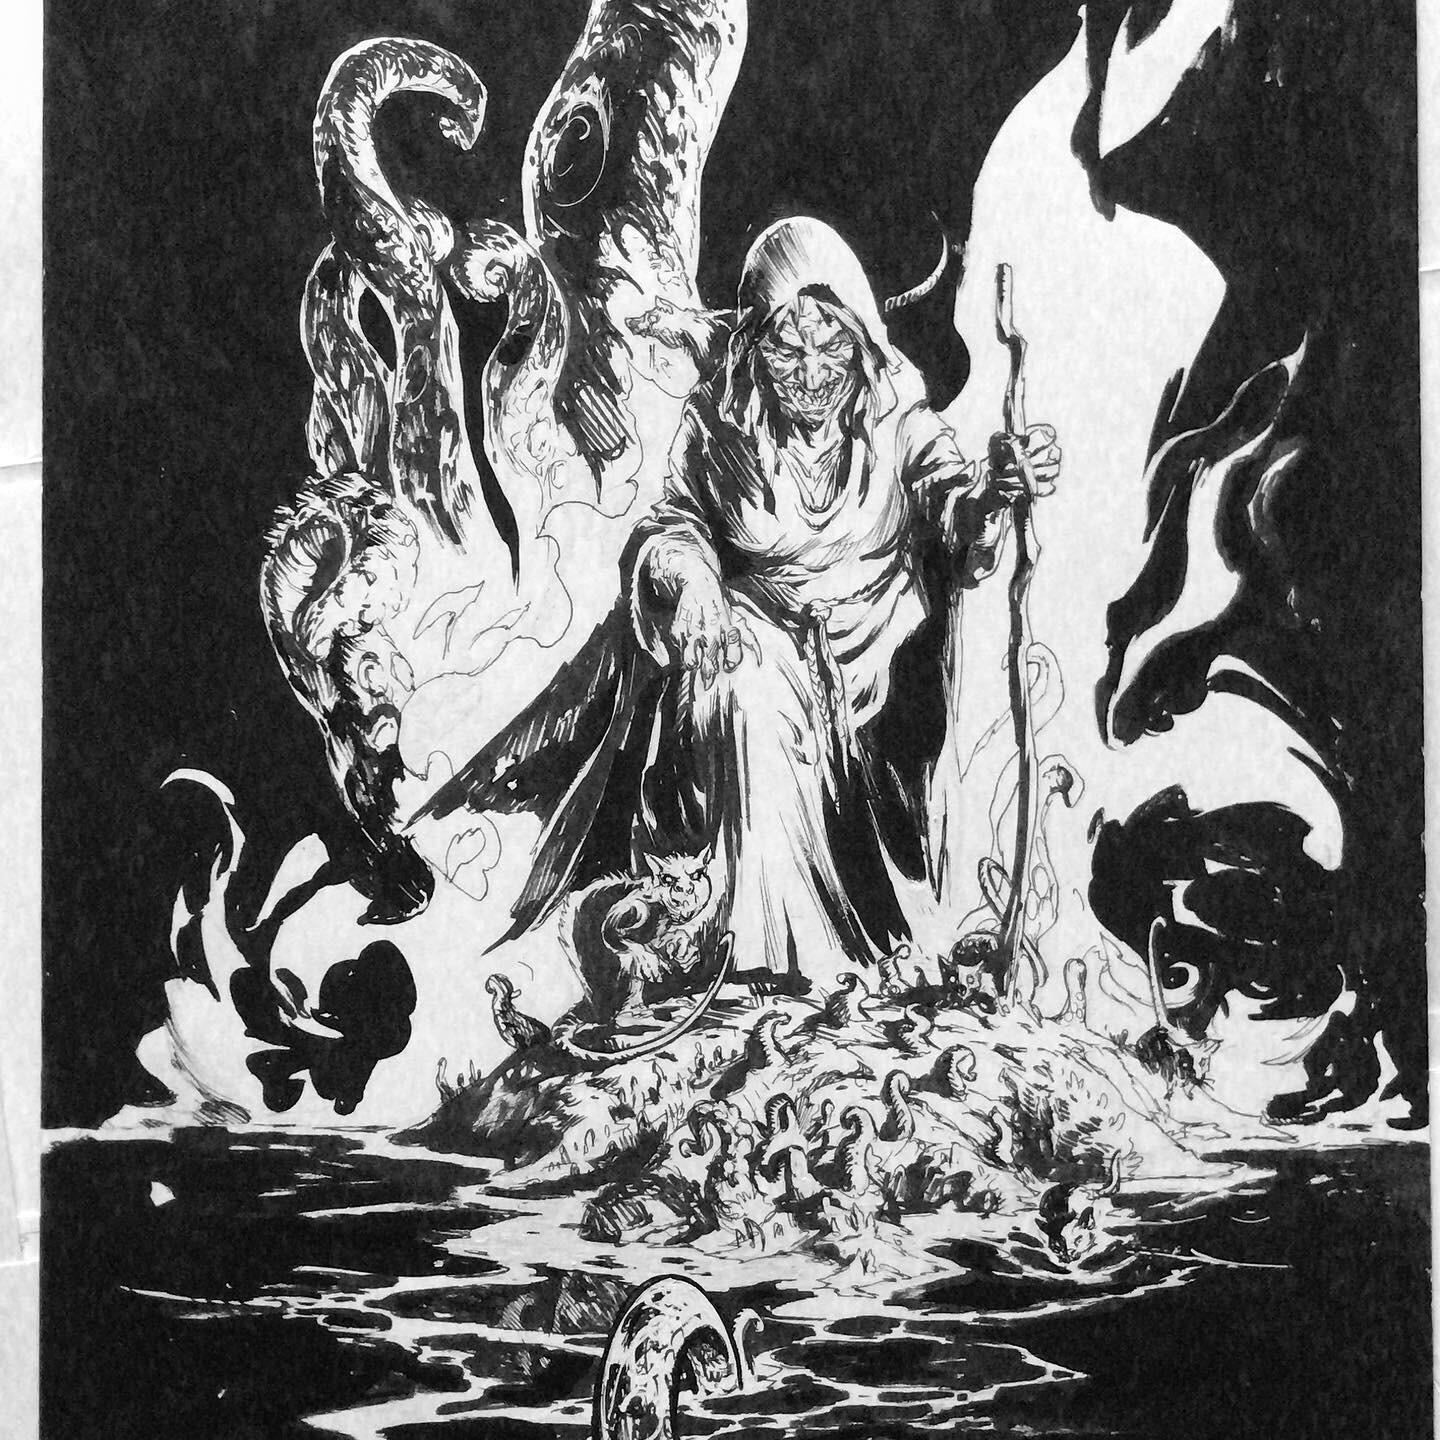 Bonus from the vault: pitch illustration to sell our "dreams in the witch house" HP Lovecraft adaptation to the publishers, back in the day